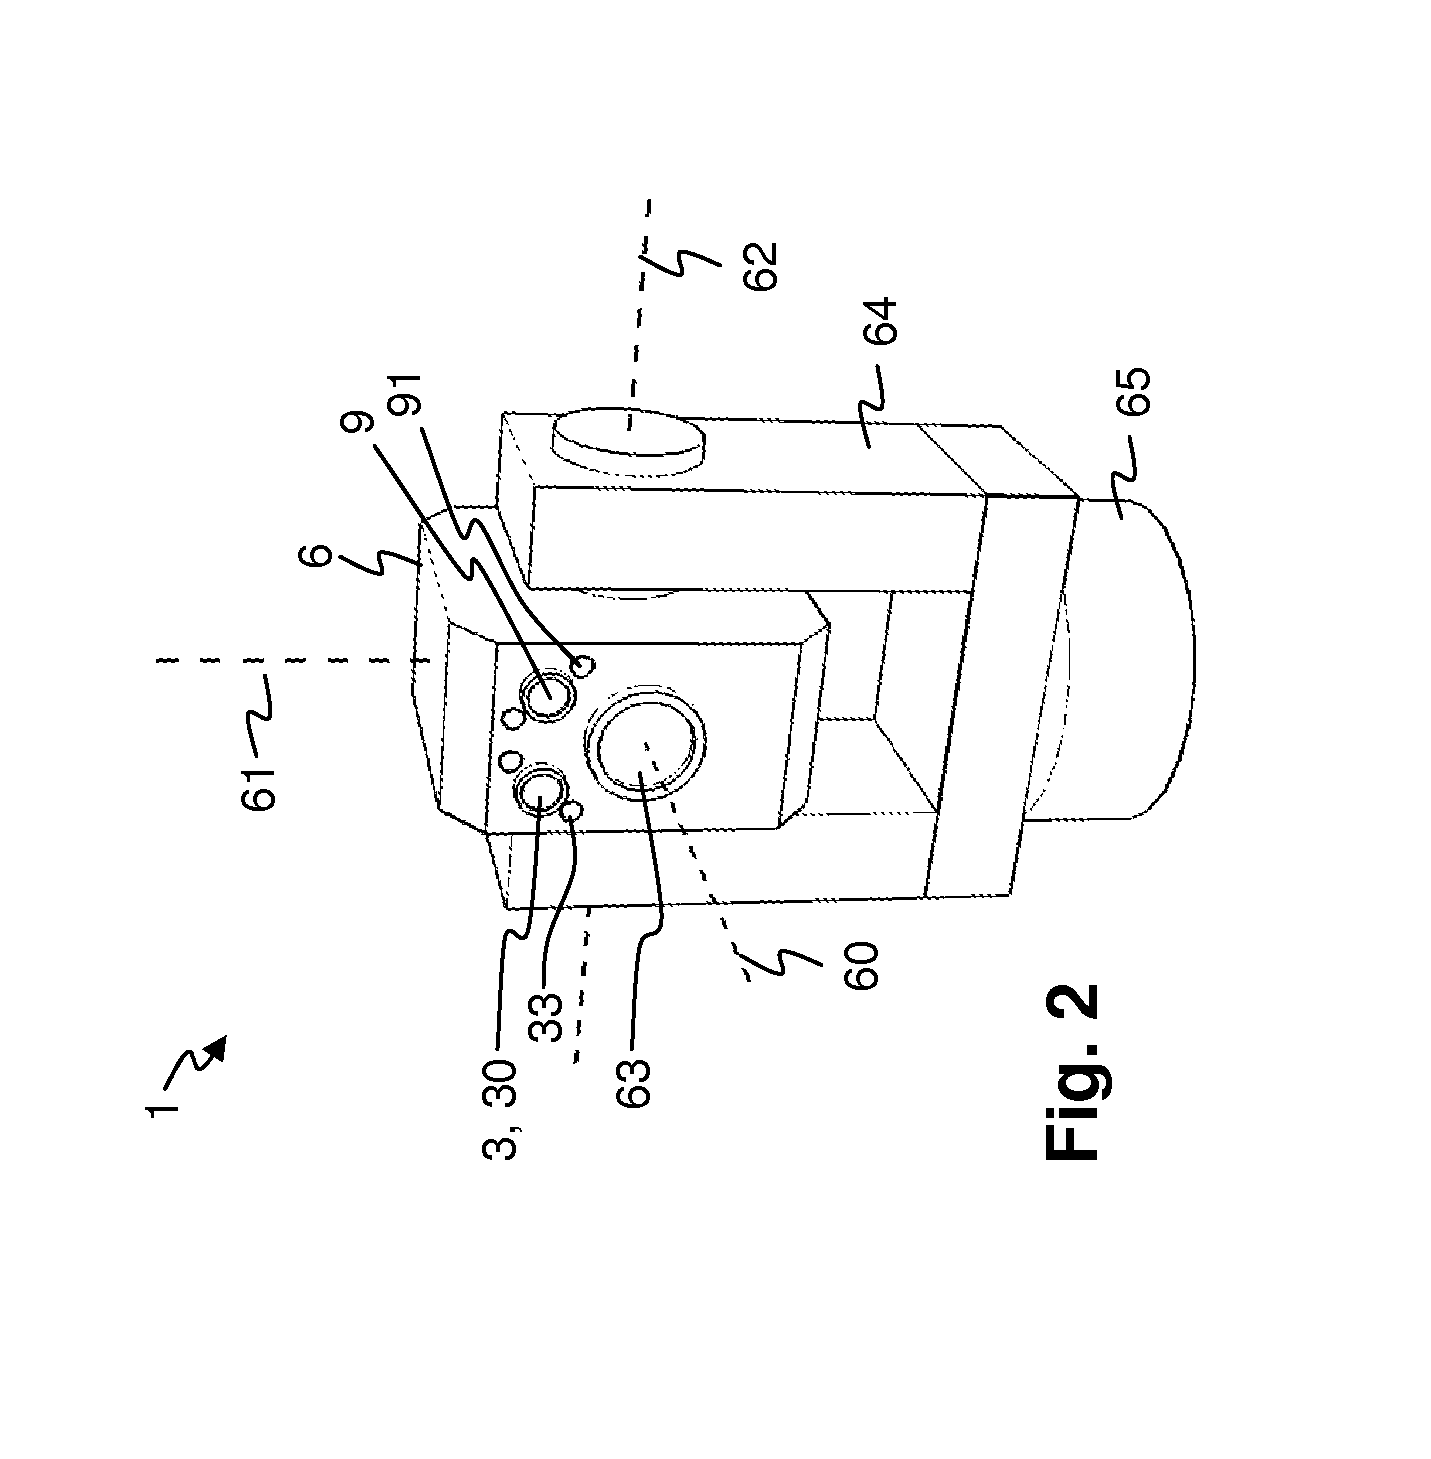 Coordinate measuring device having automatic target detection